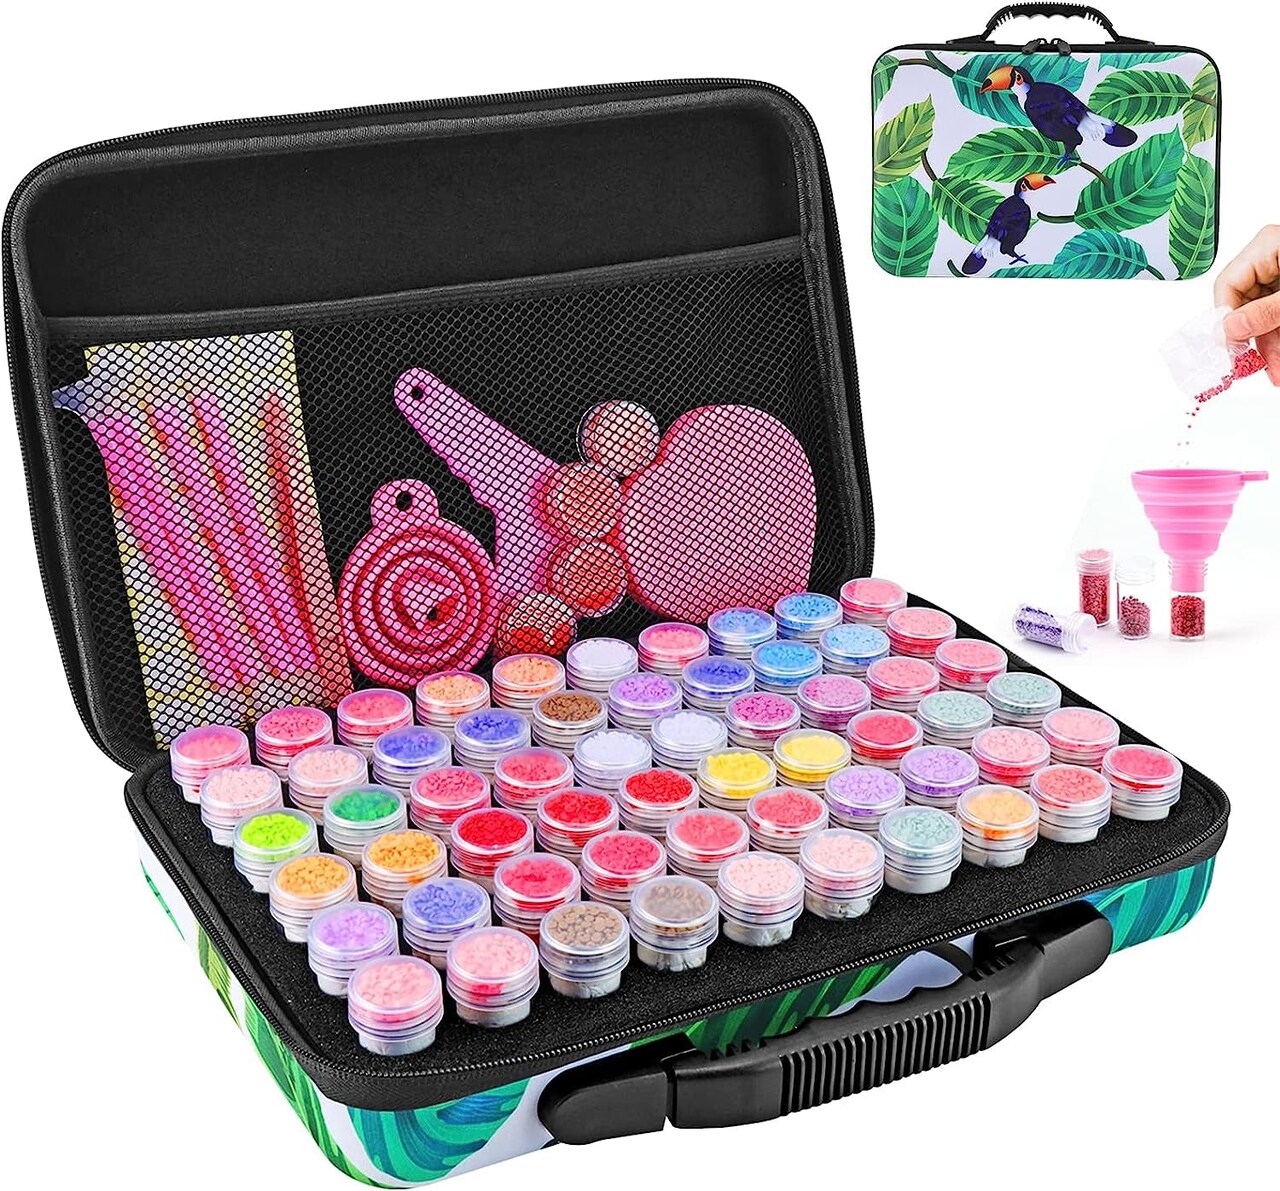 Diamond Painting Storage Containers, 60 Slots Portable Diamond Art Organizer  Shockproof with Diamond Painting Accessories and Tools for Craft Jewelry  Beads Rings Charms Glitter (Black)